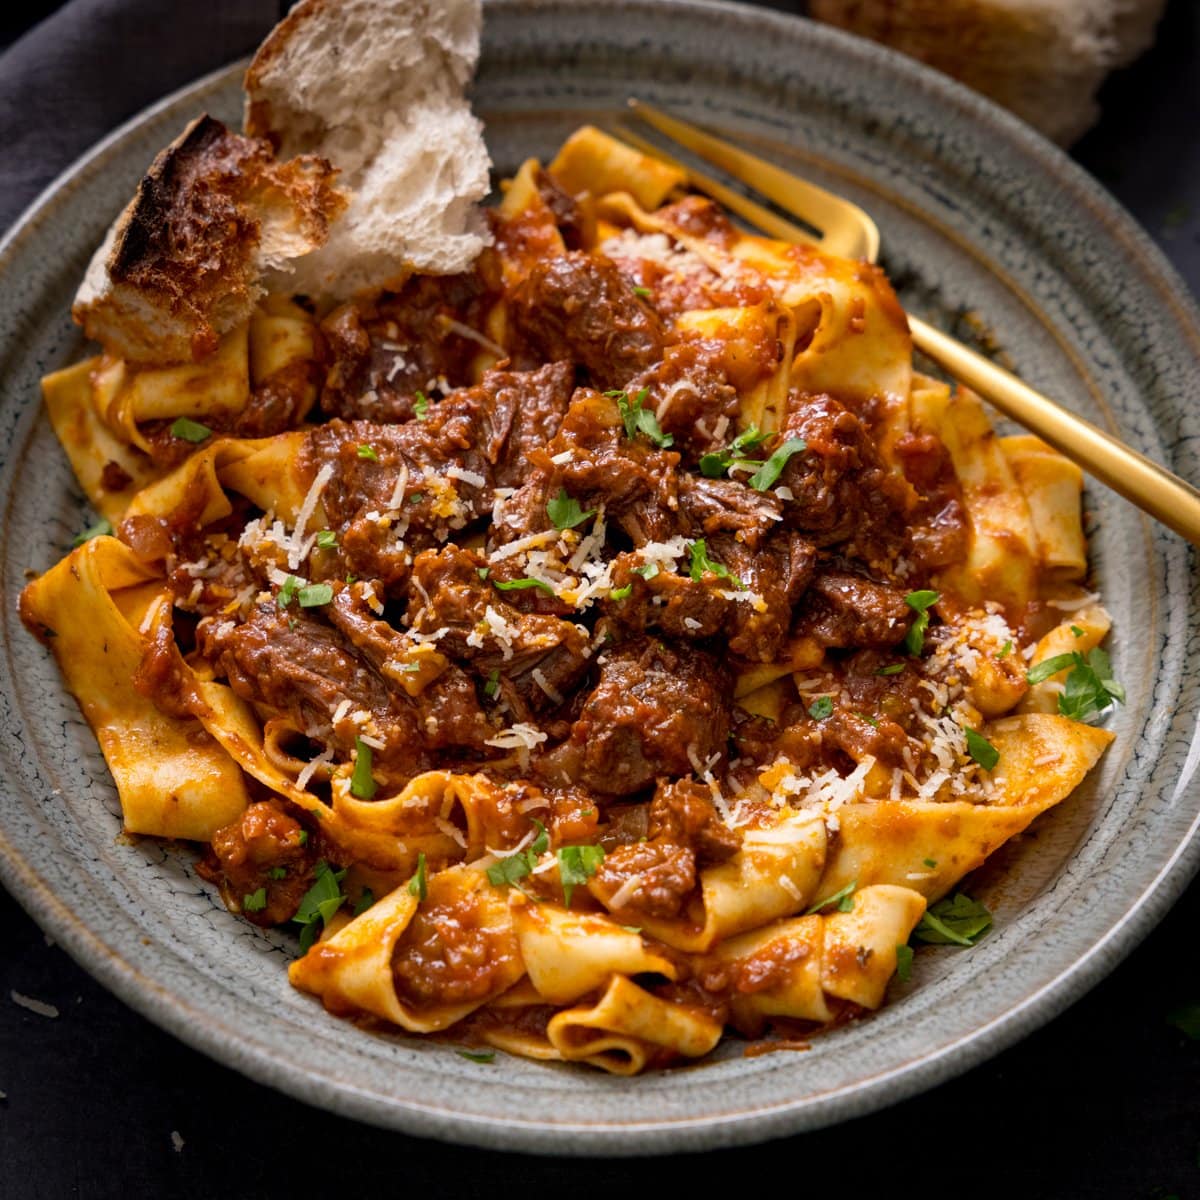 Beef ragu with pappardelle in a green bowl